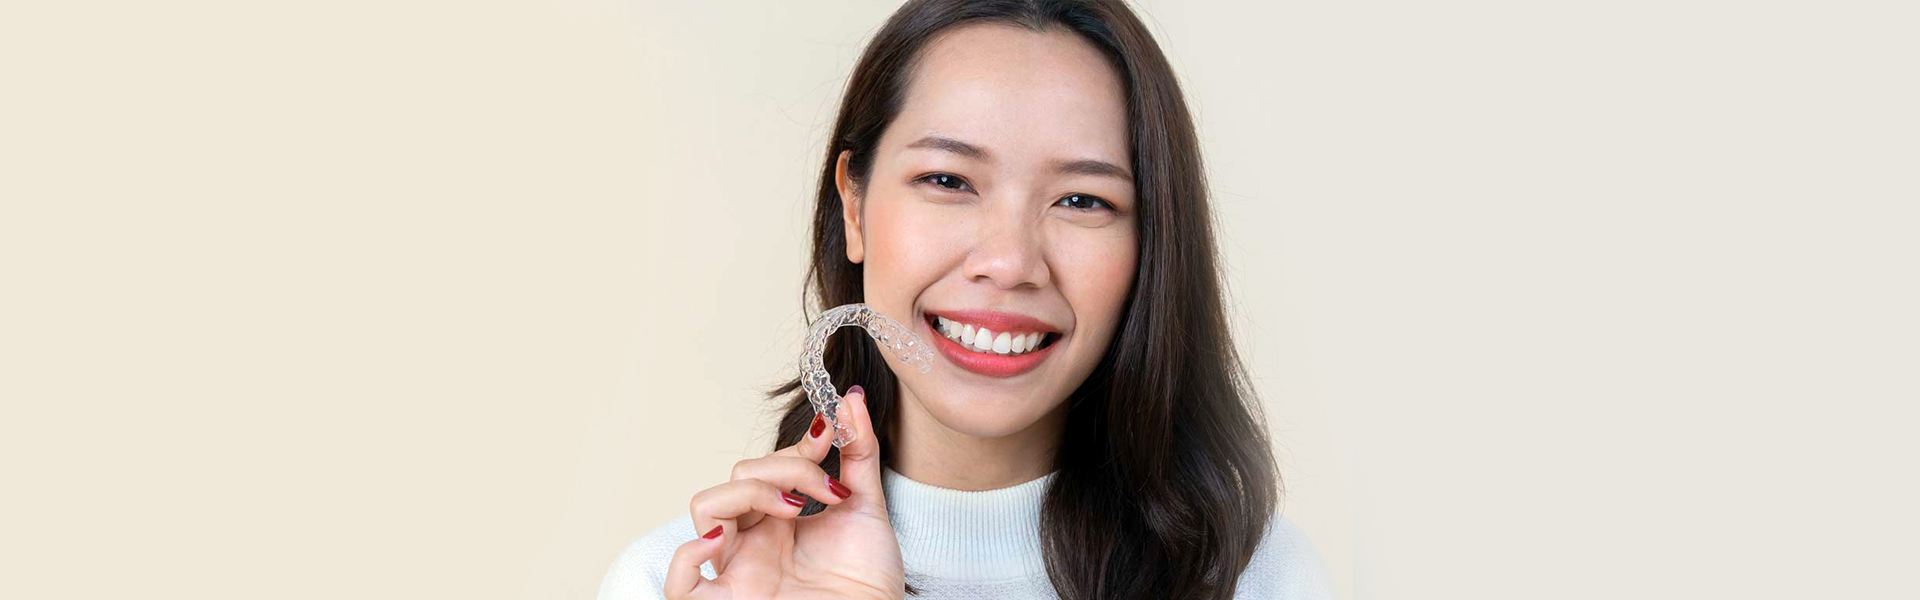 Everything You Need to Know About Invisalign Aligners: A Great Alternative to Regular Braces